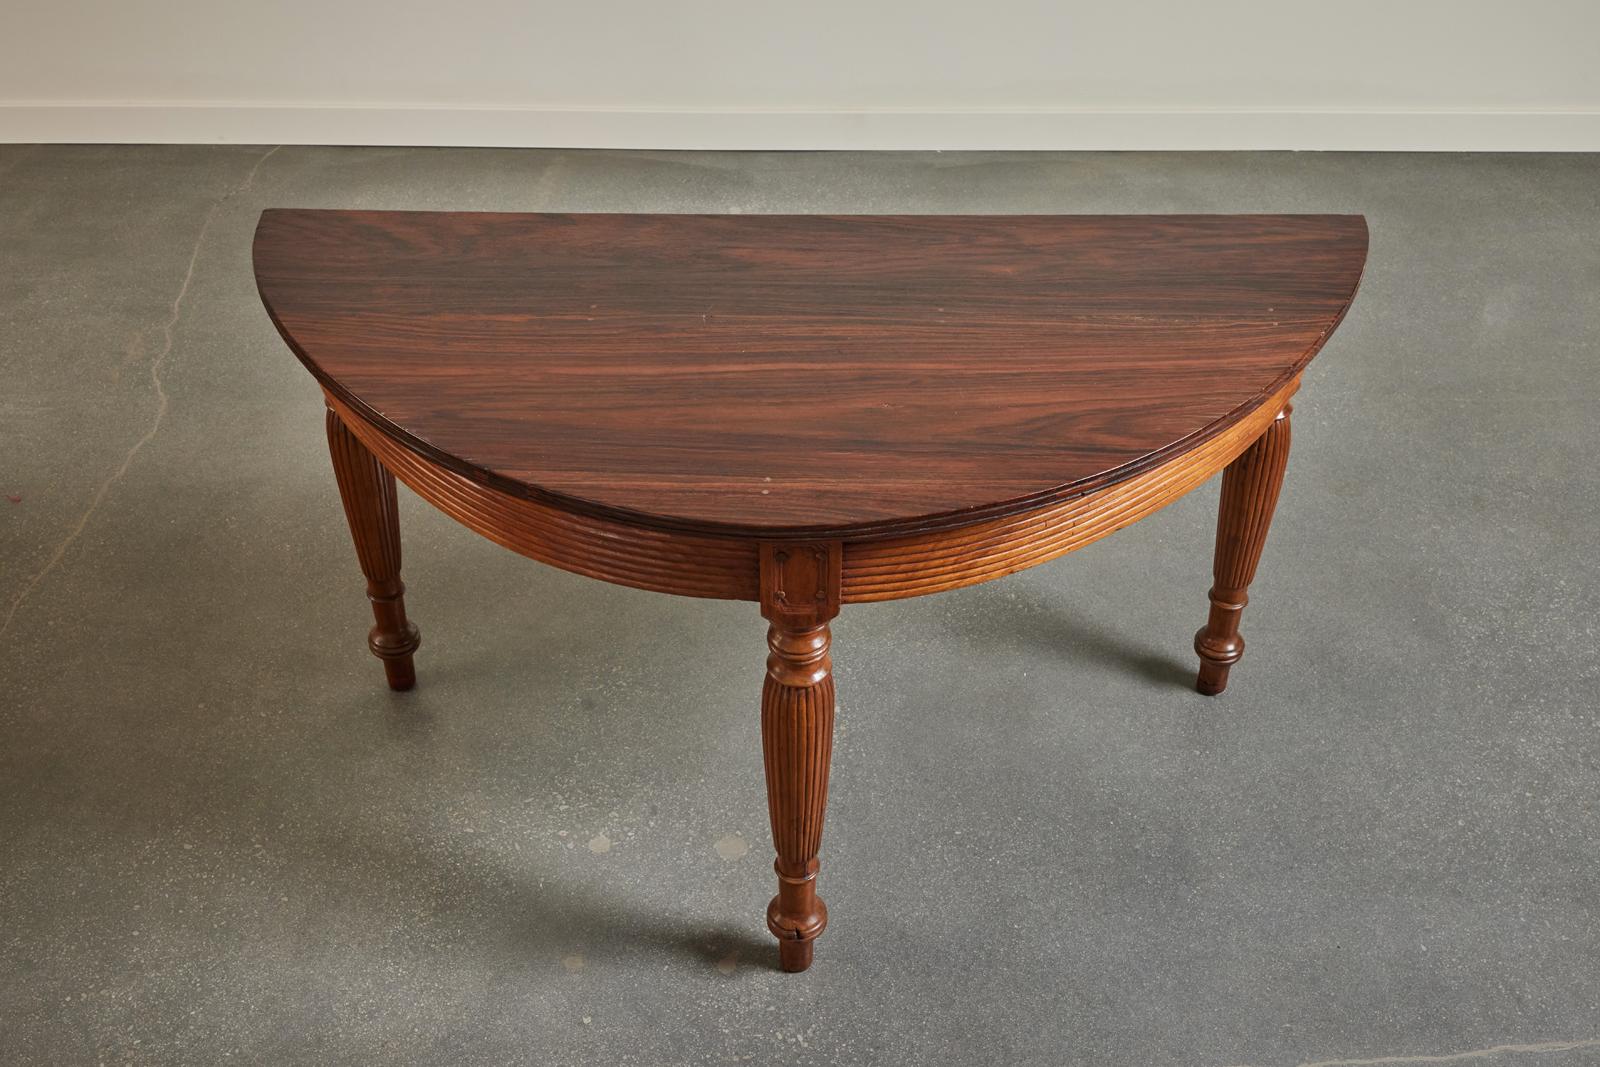 British Colonial 19th Century Colonial demilune Table from Indonesia